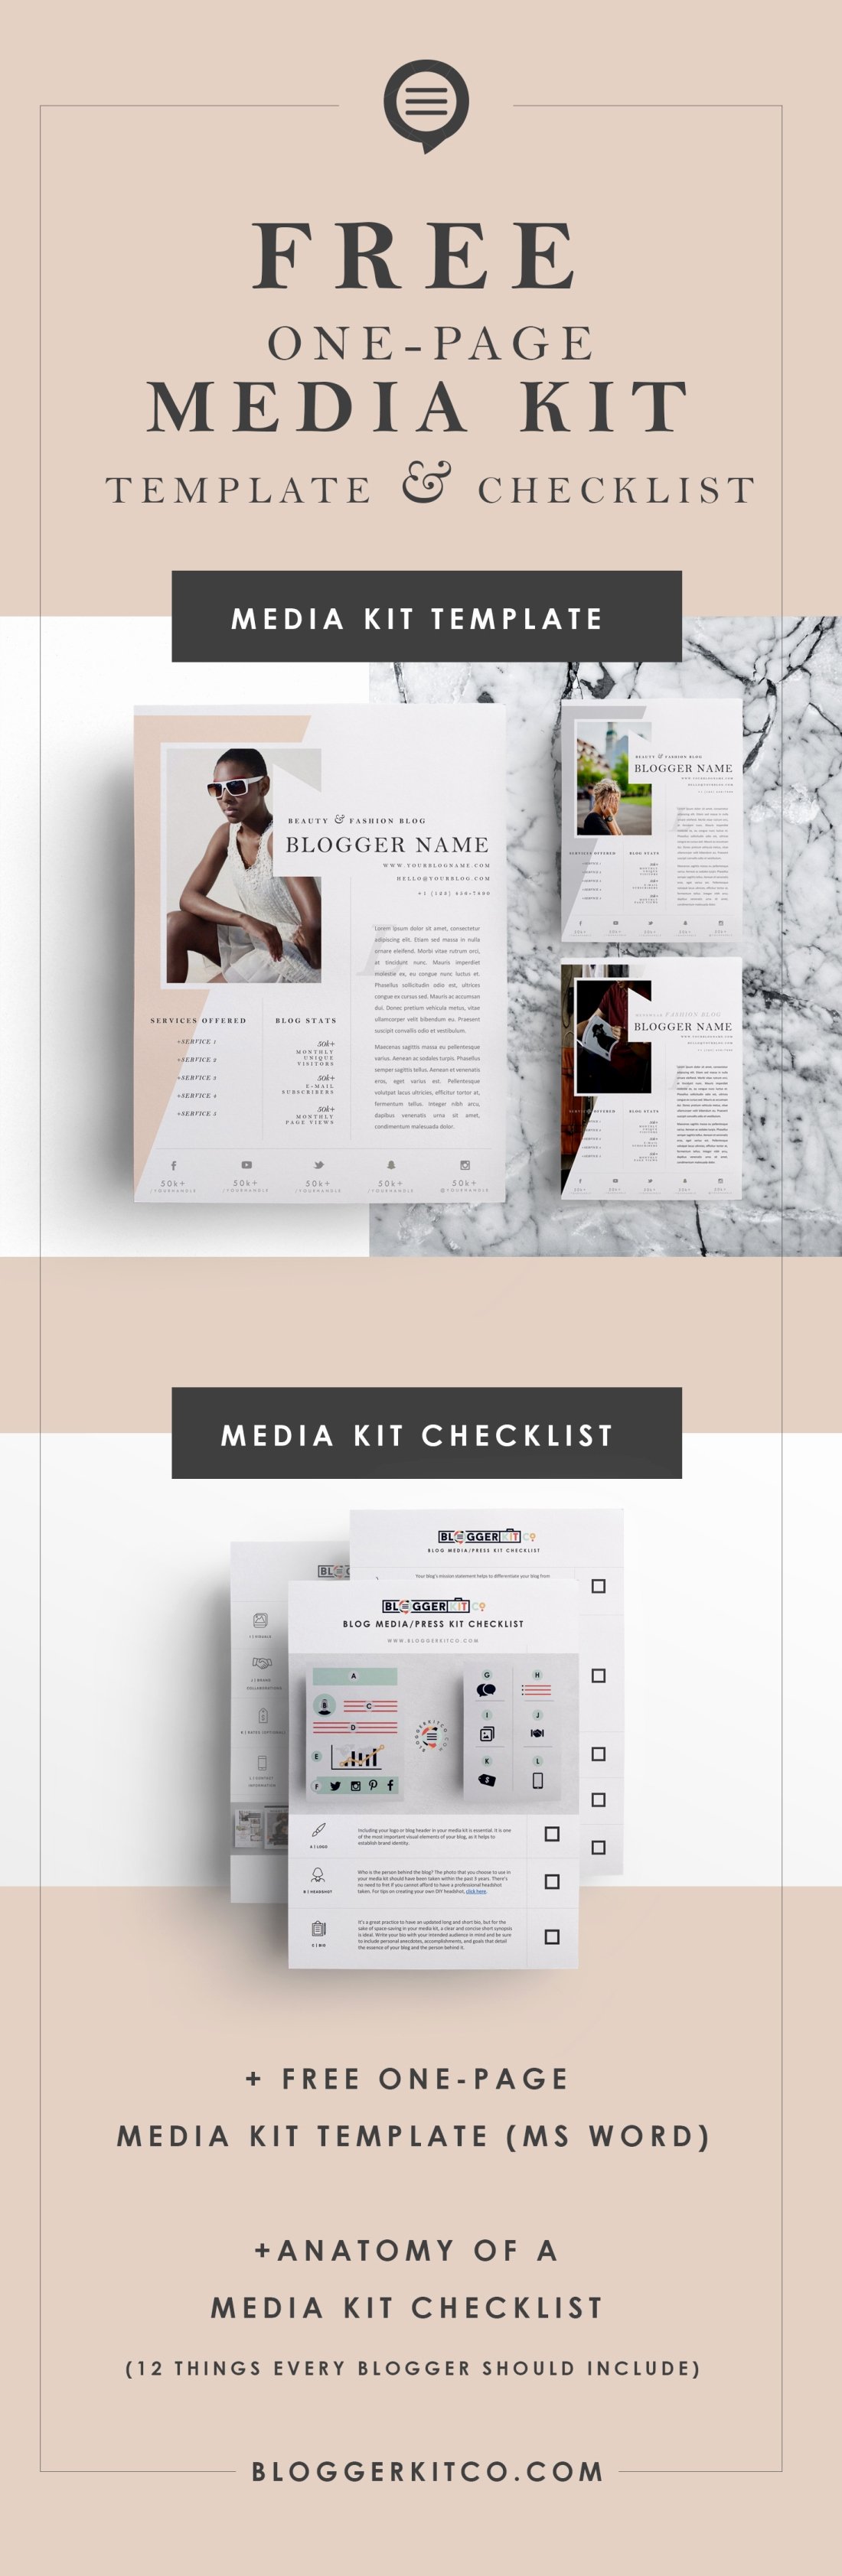 Press Kit Templates Free Luxury Anatomy Of A Media Kit What Every Blogger Should Include